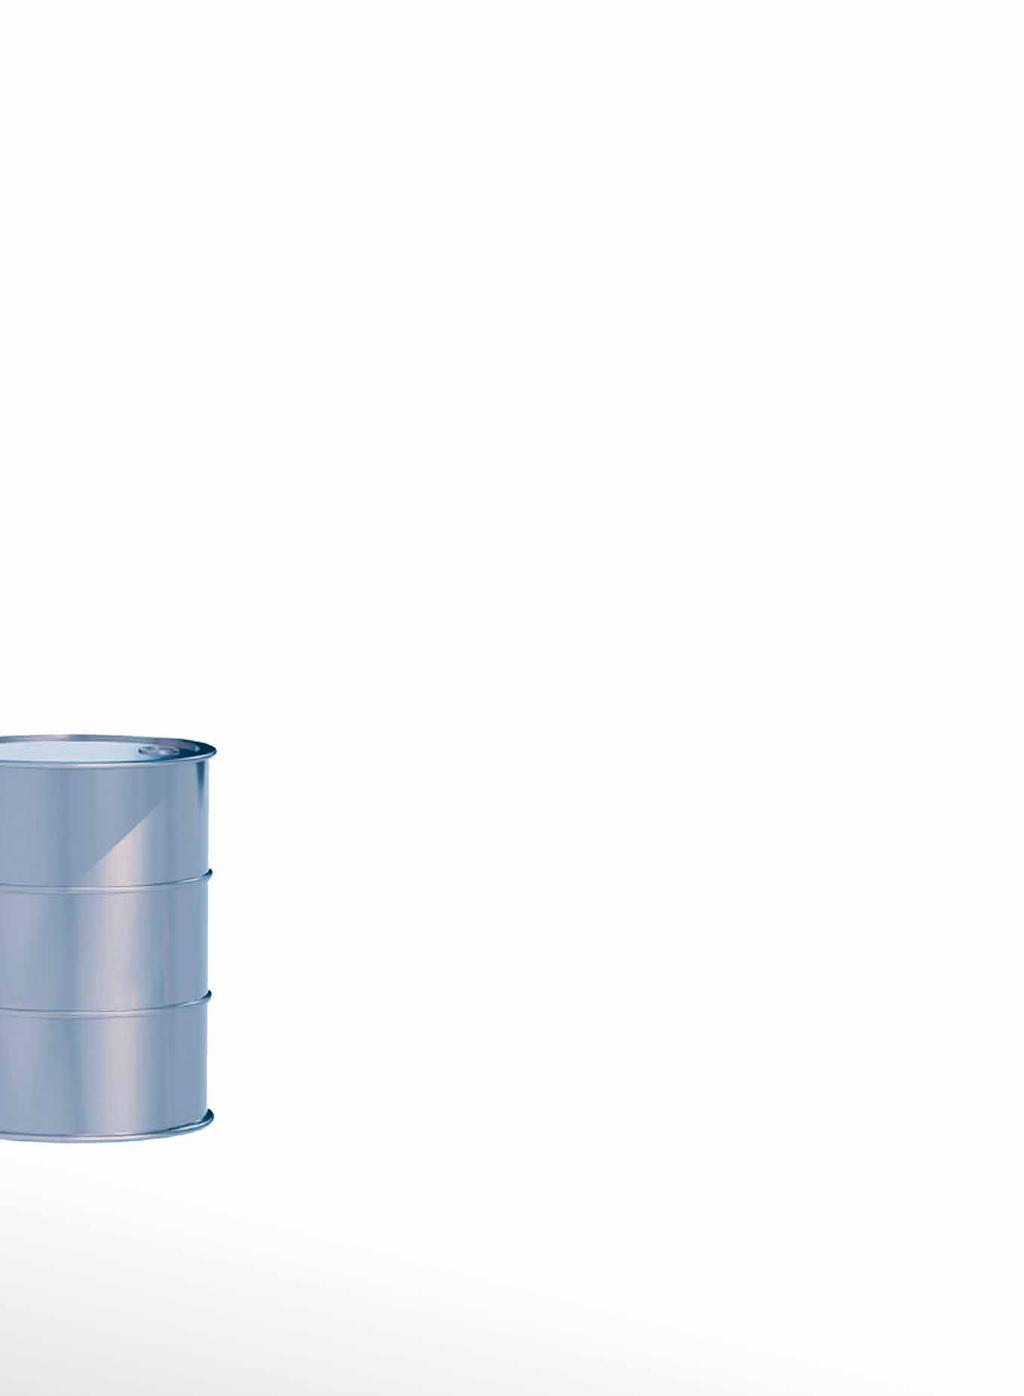 DEF Solutions Standard Pump has designed a range of unique, preconfigured DEF Pump Packages that are engineered to transfer AdBlue (AUS32) Diesel Exhaust Fluid (DEF) directly from barrels, drums and